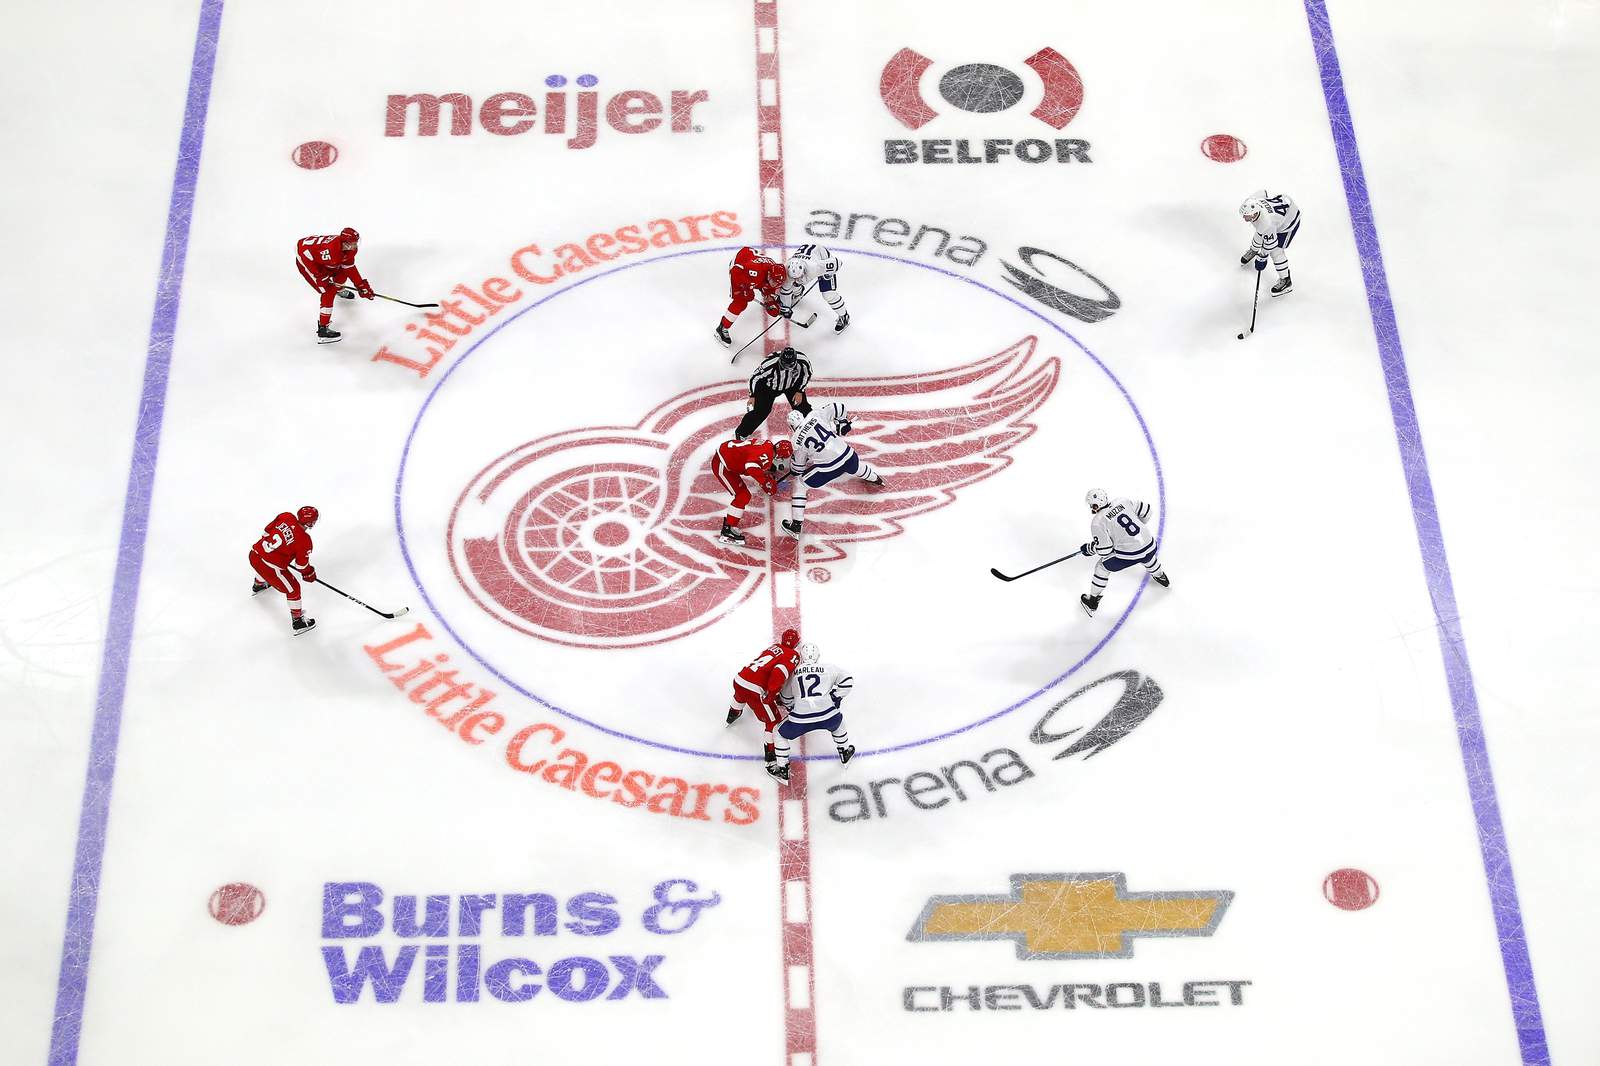 Red Wings announce partnership with PointsBet sportsbook operator